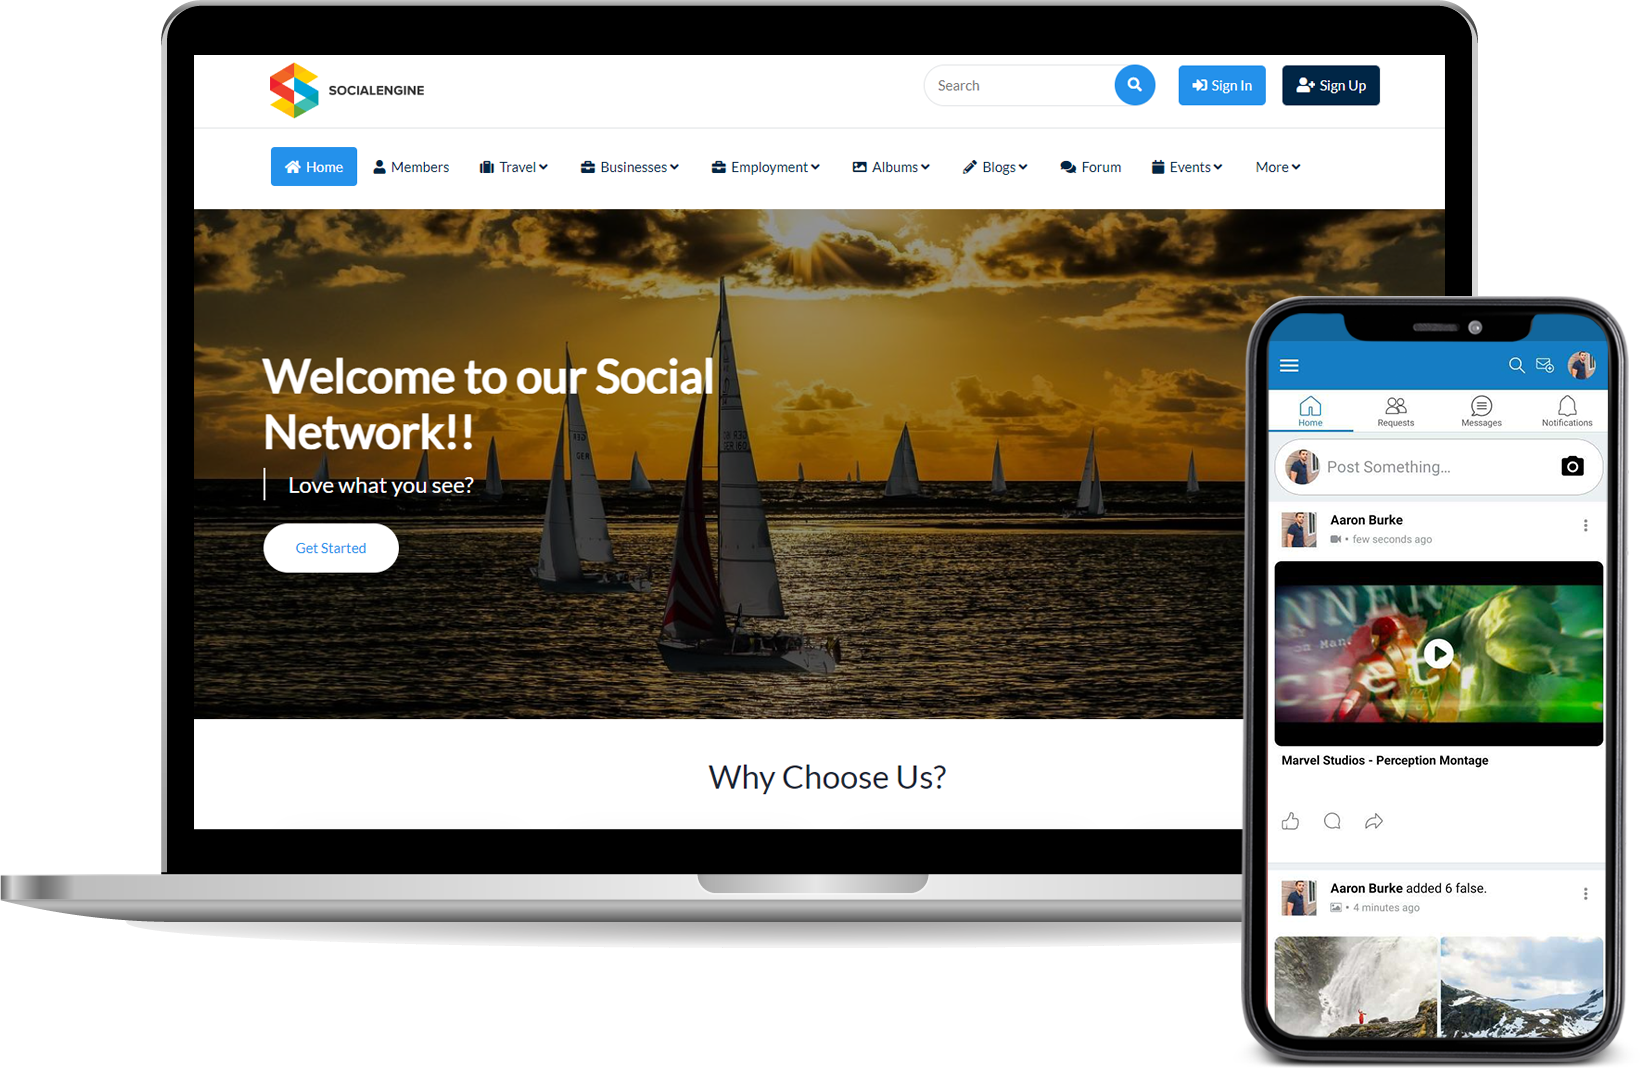 Social Engine – Create Your Own Social Network - SocialEngine Create Your Own Social Network v6.5.0 by Socialengine Nulled Free Download